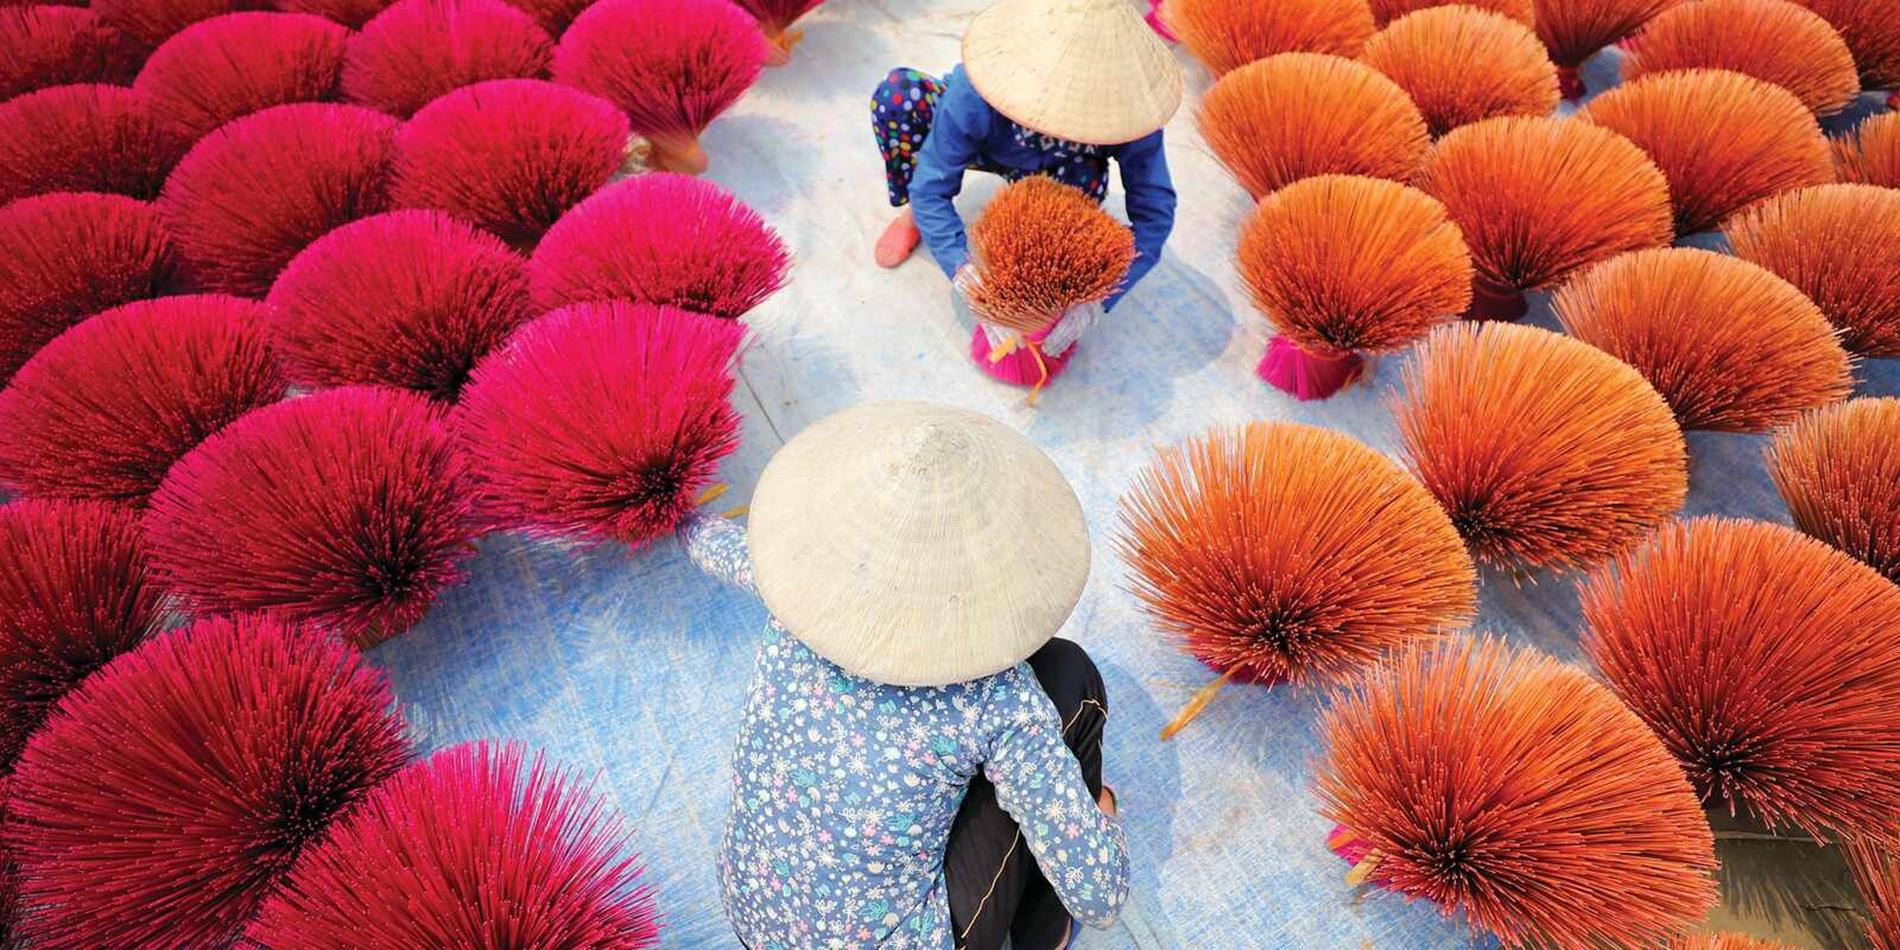 Vietnamese ladies working with colourful insence sticks